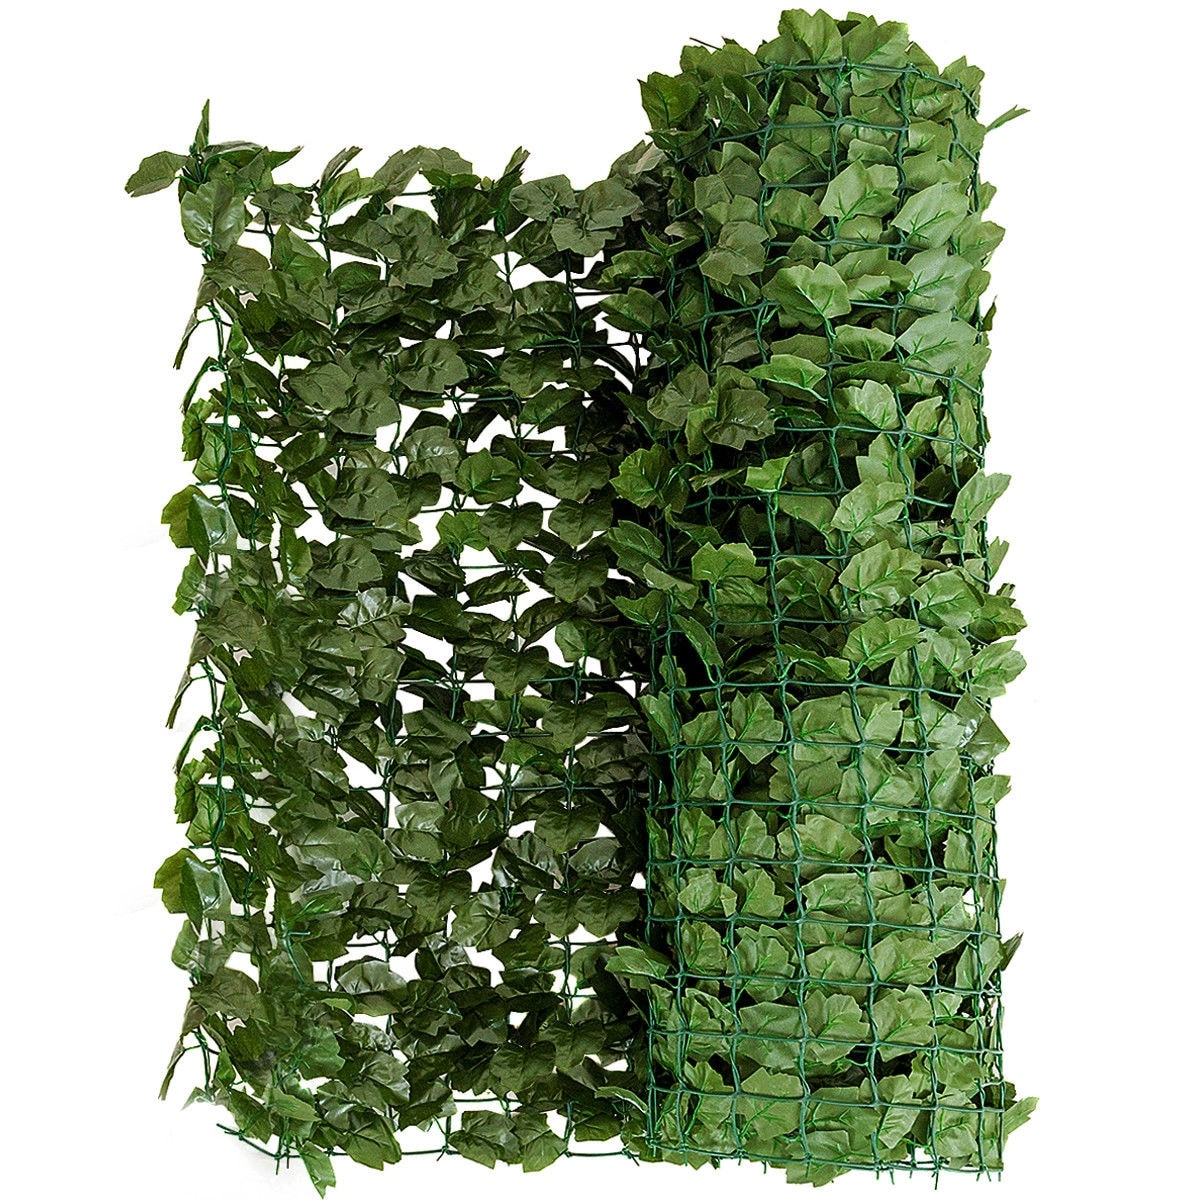 Decorative Artificial Plastic Leaves Willow Screen Garden Office